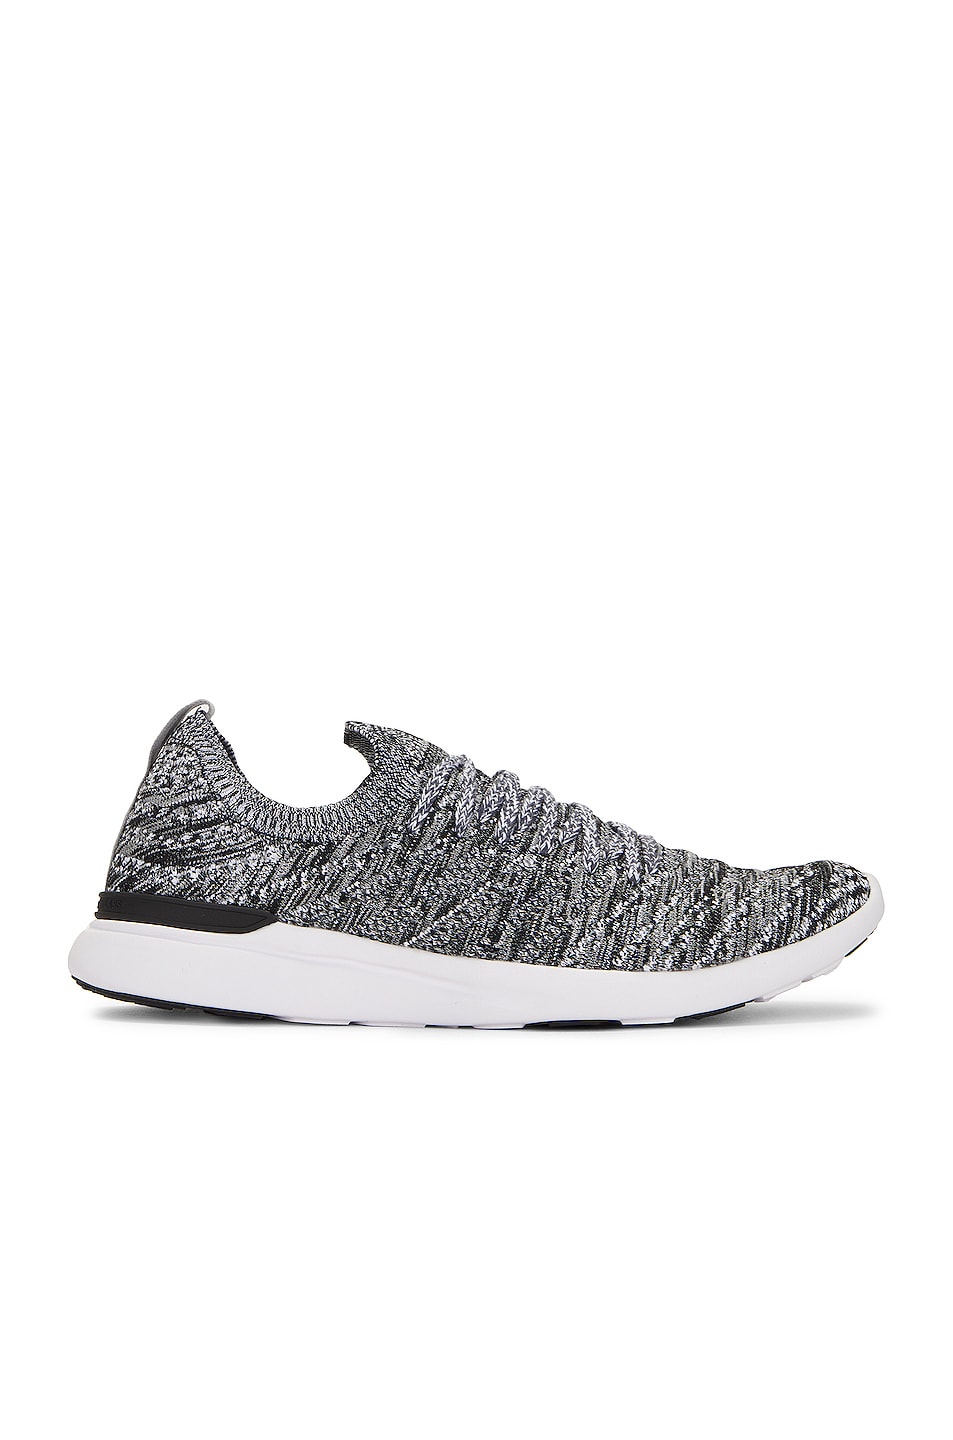 Image 1 of APL: Athletic Propulsion Labs Techloom Wave in Heather Grey, Black, & White